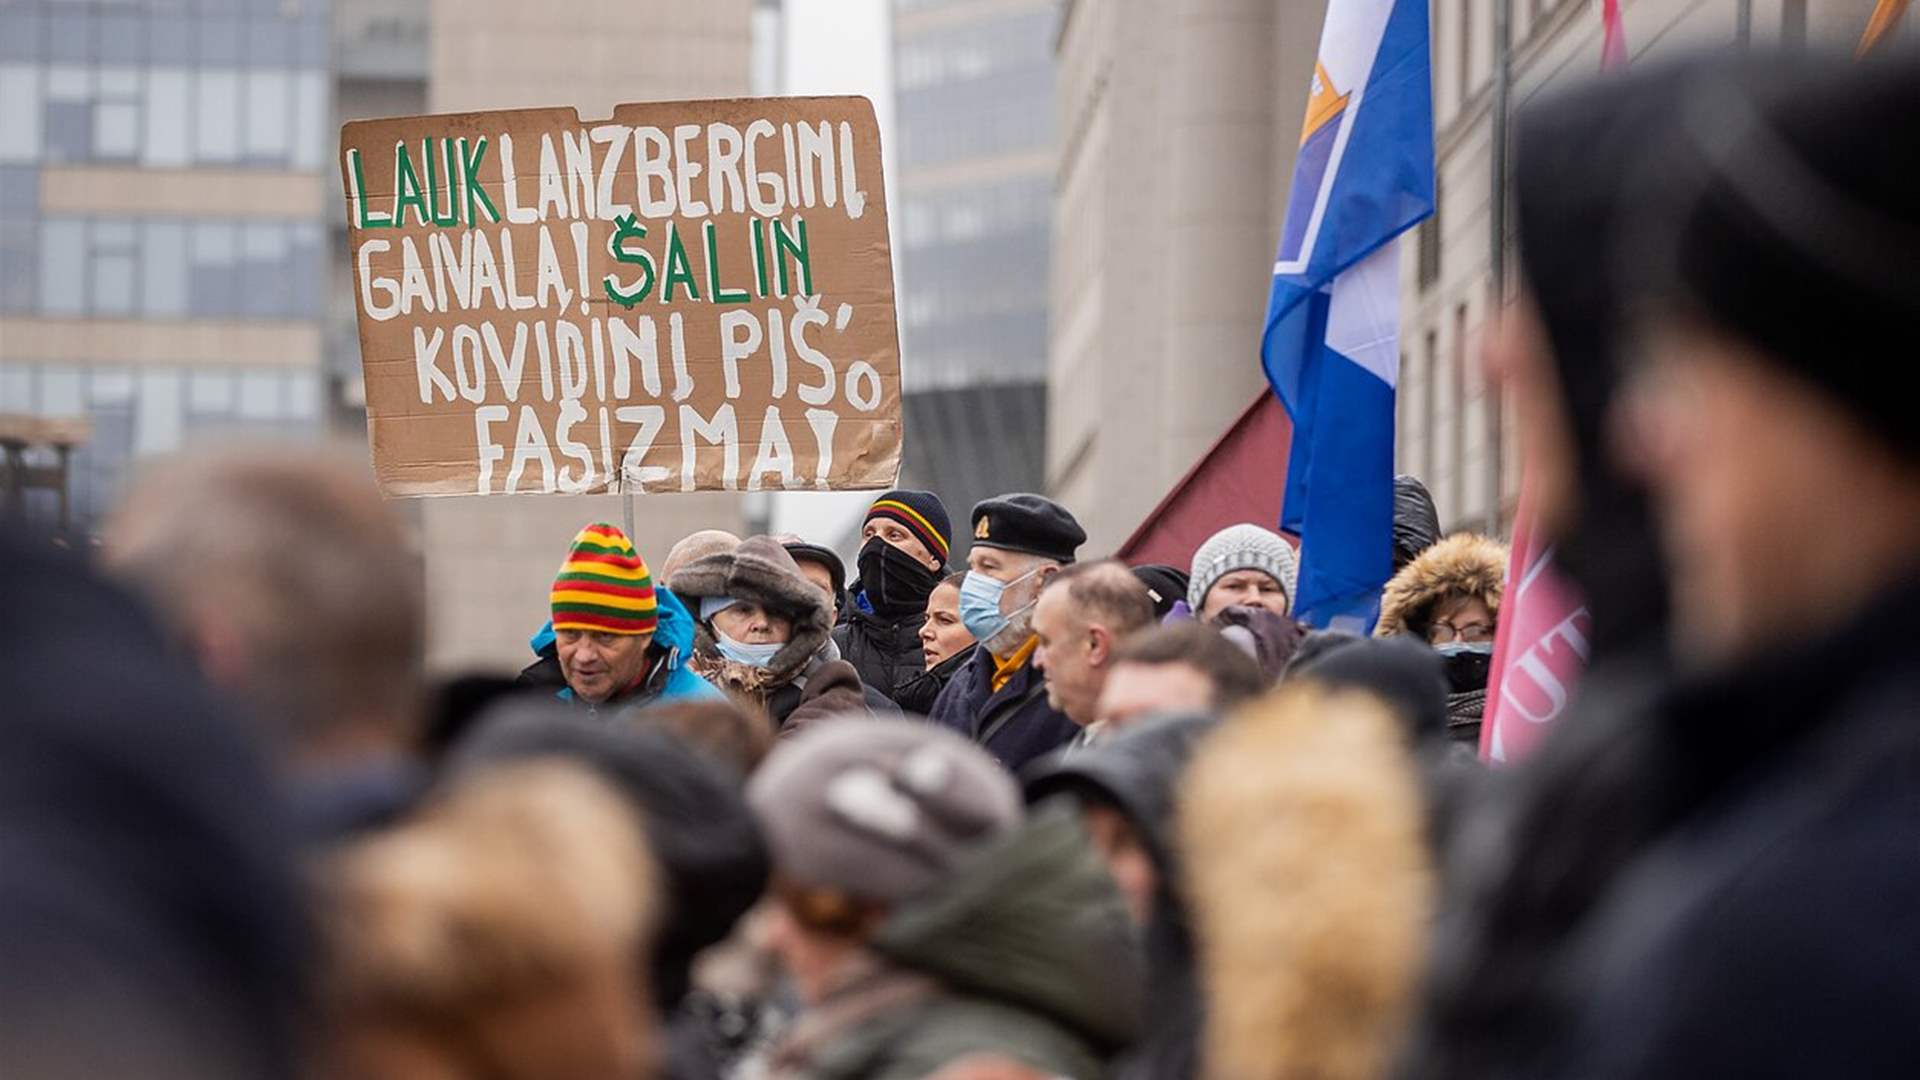 Hundreds protest in Lithuania to mark the third anniversary of democracy protests